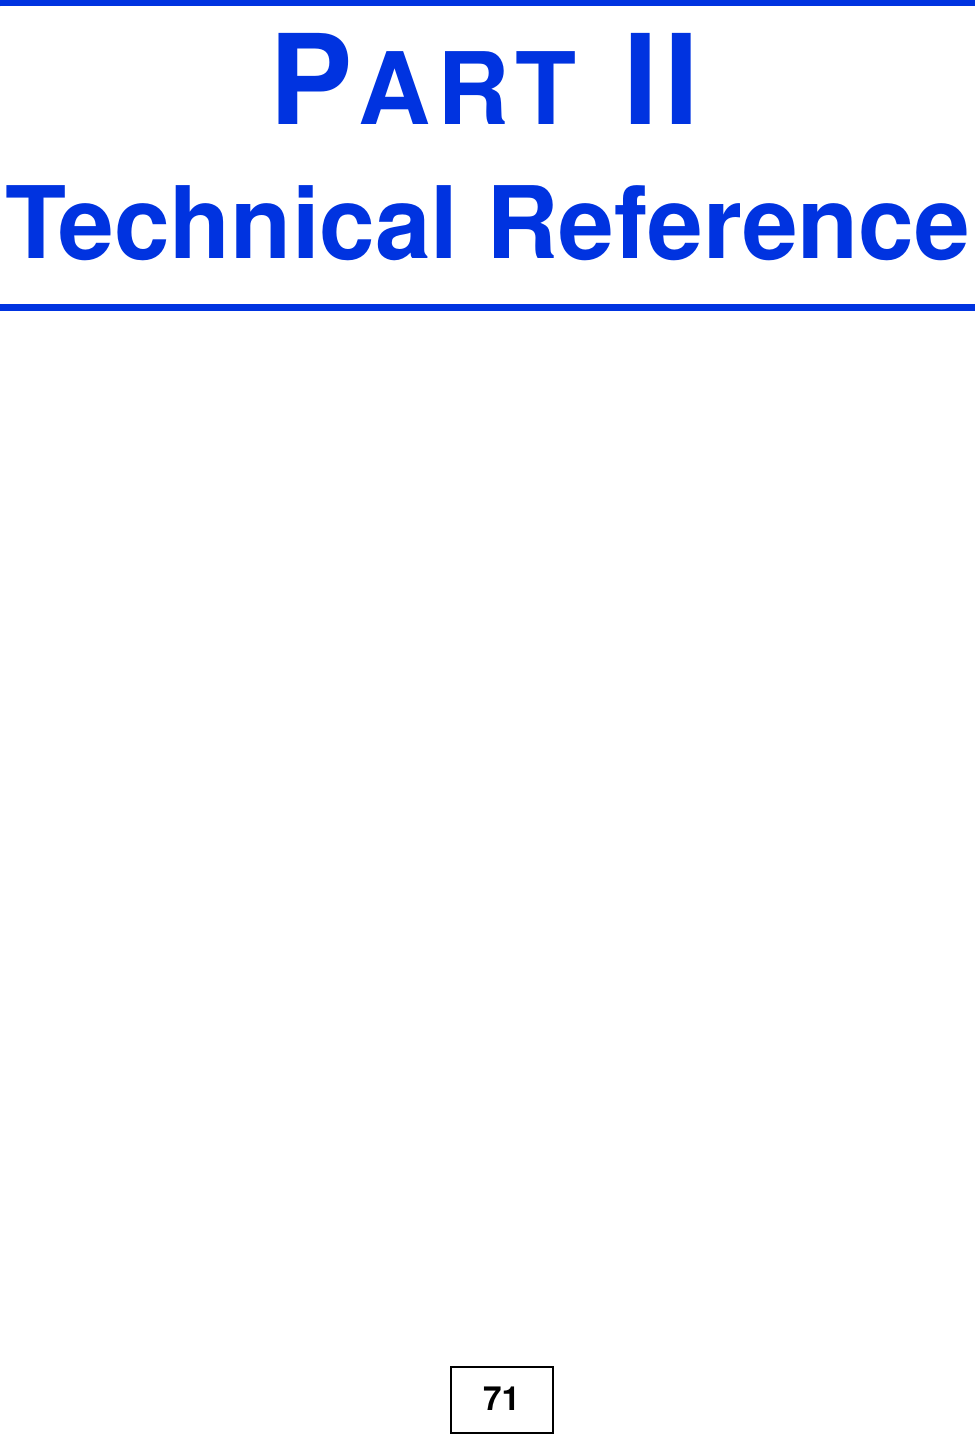 71PART IITechnical Reference